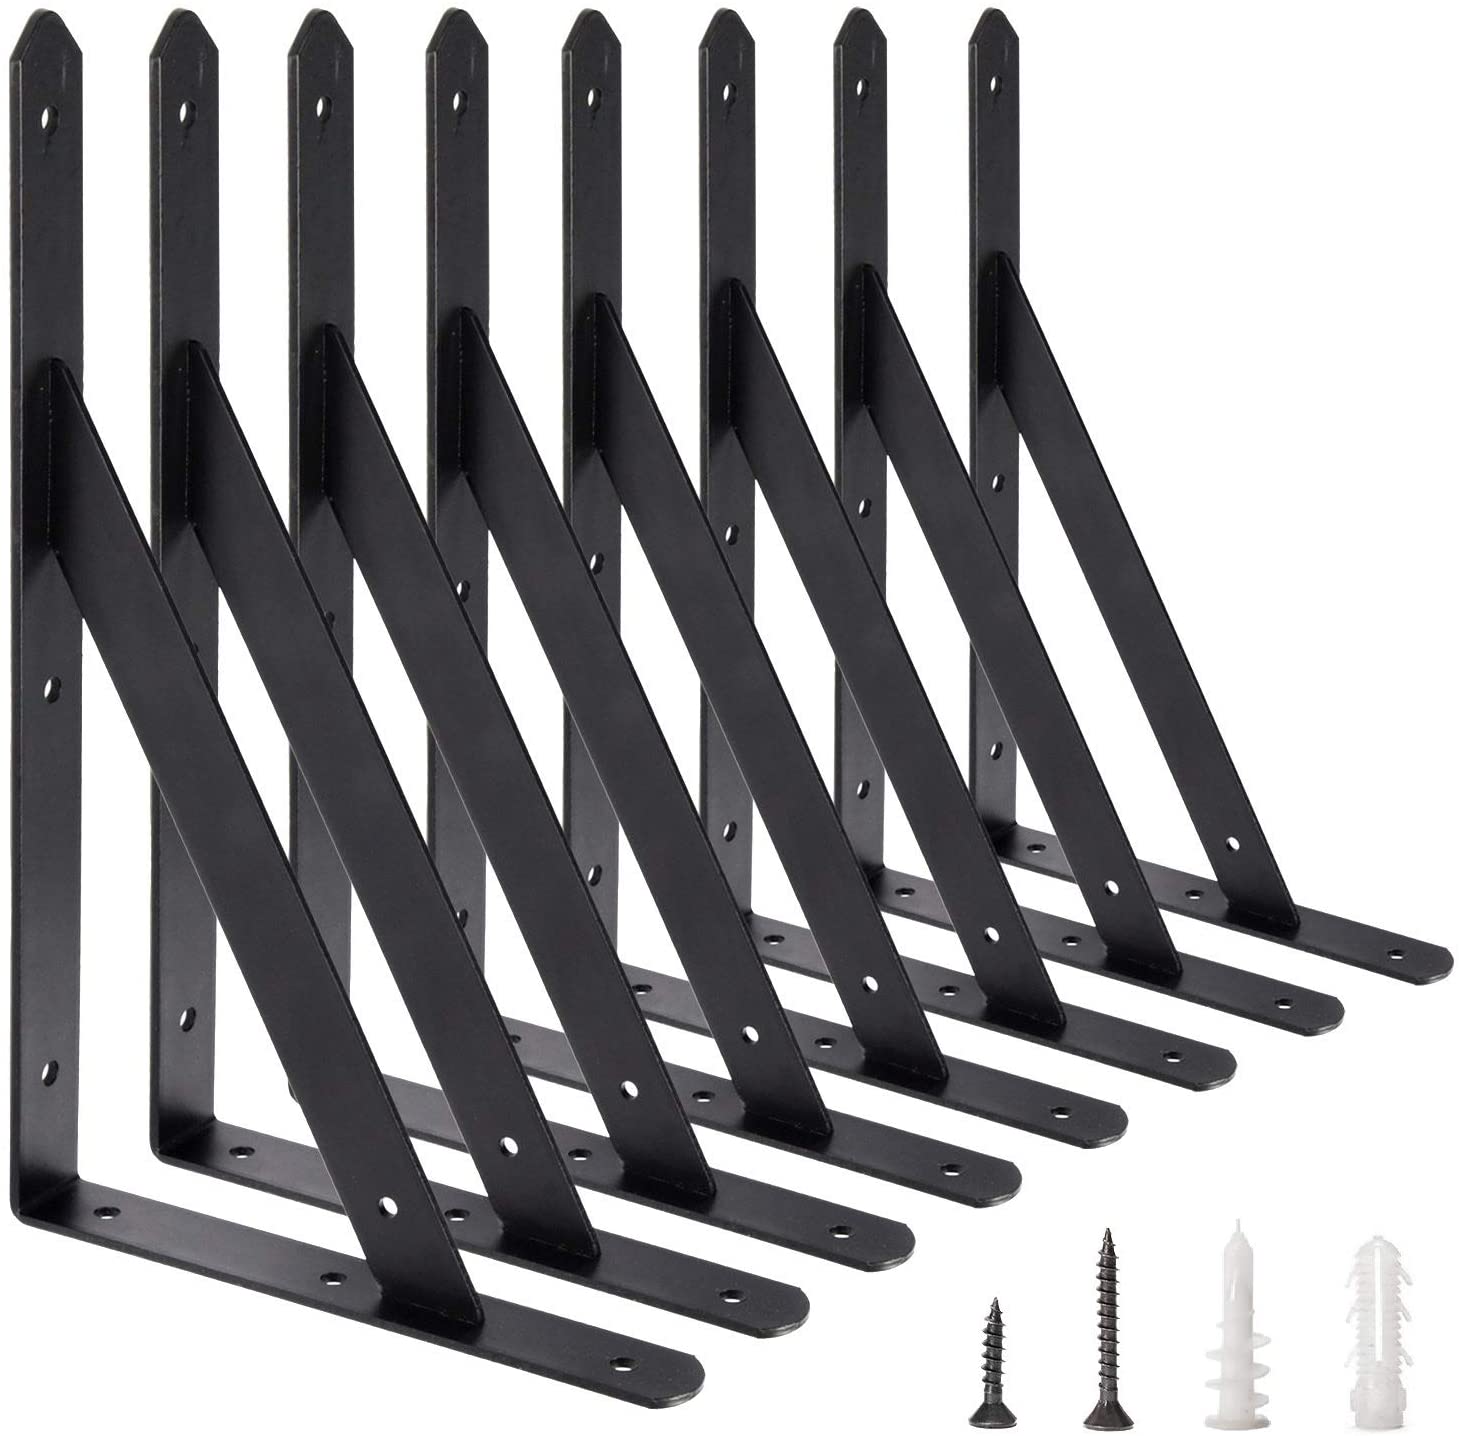 AWX Forged Steel Counterbore Holes L Shape Shelf Brackets, 8-Pack